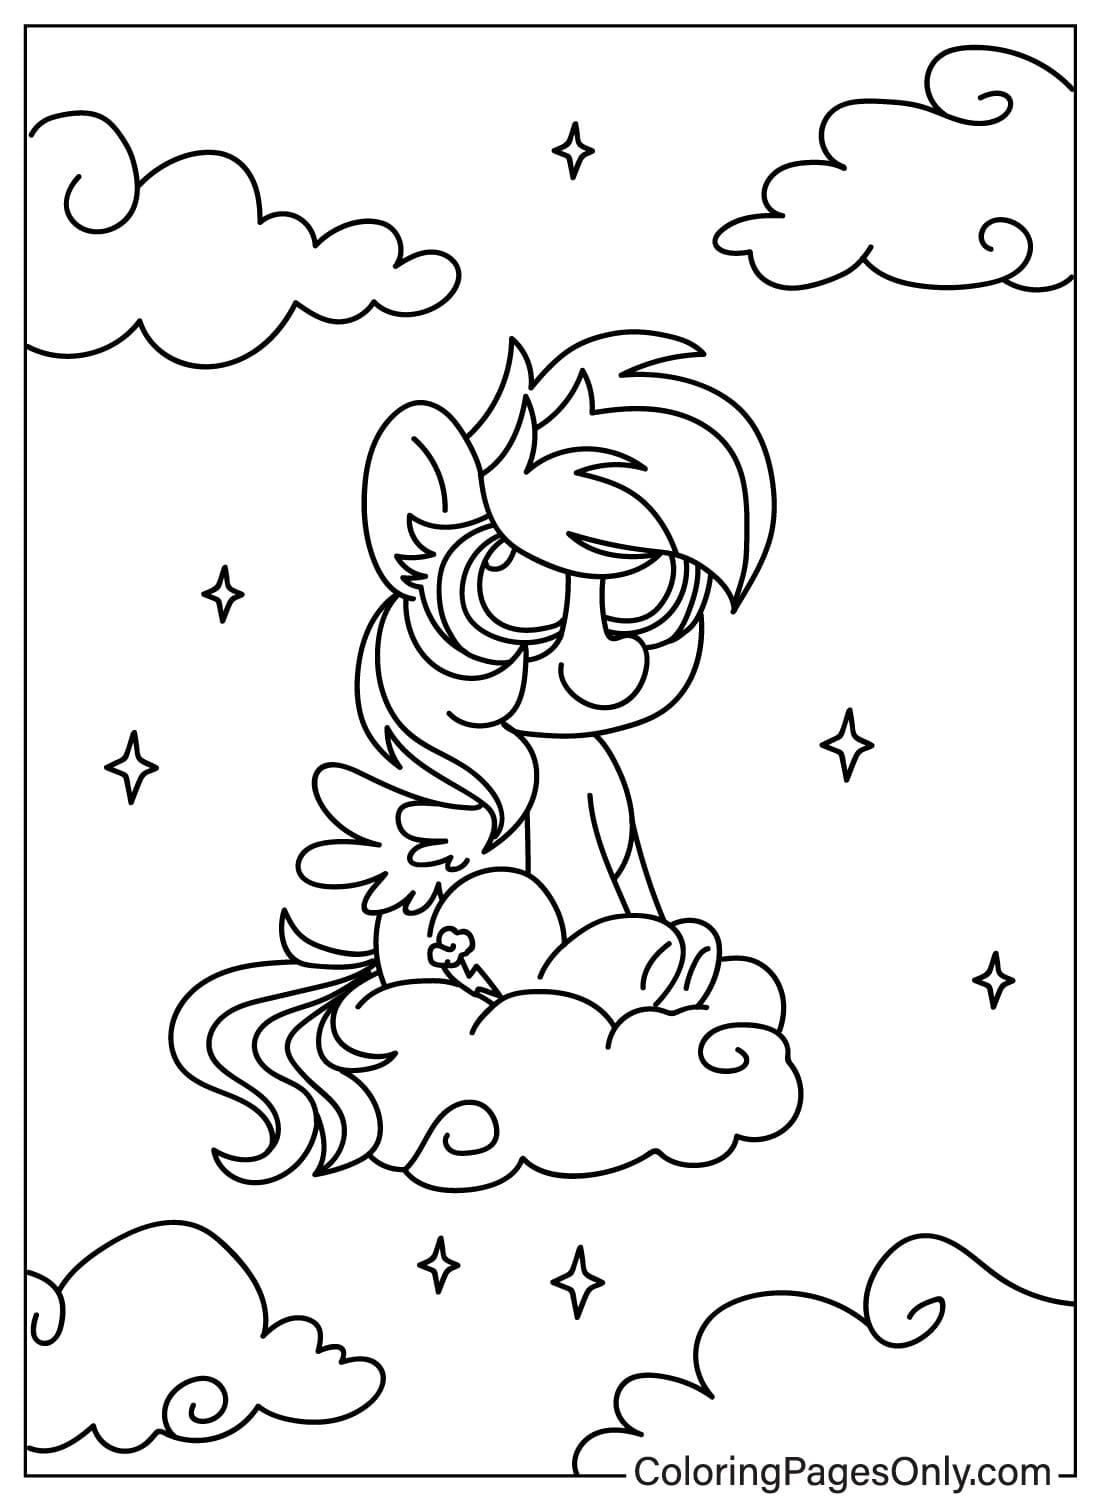 Cute Rainbow Dash Coloring Page from Rainbow Dash